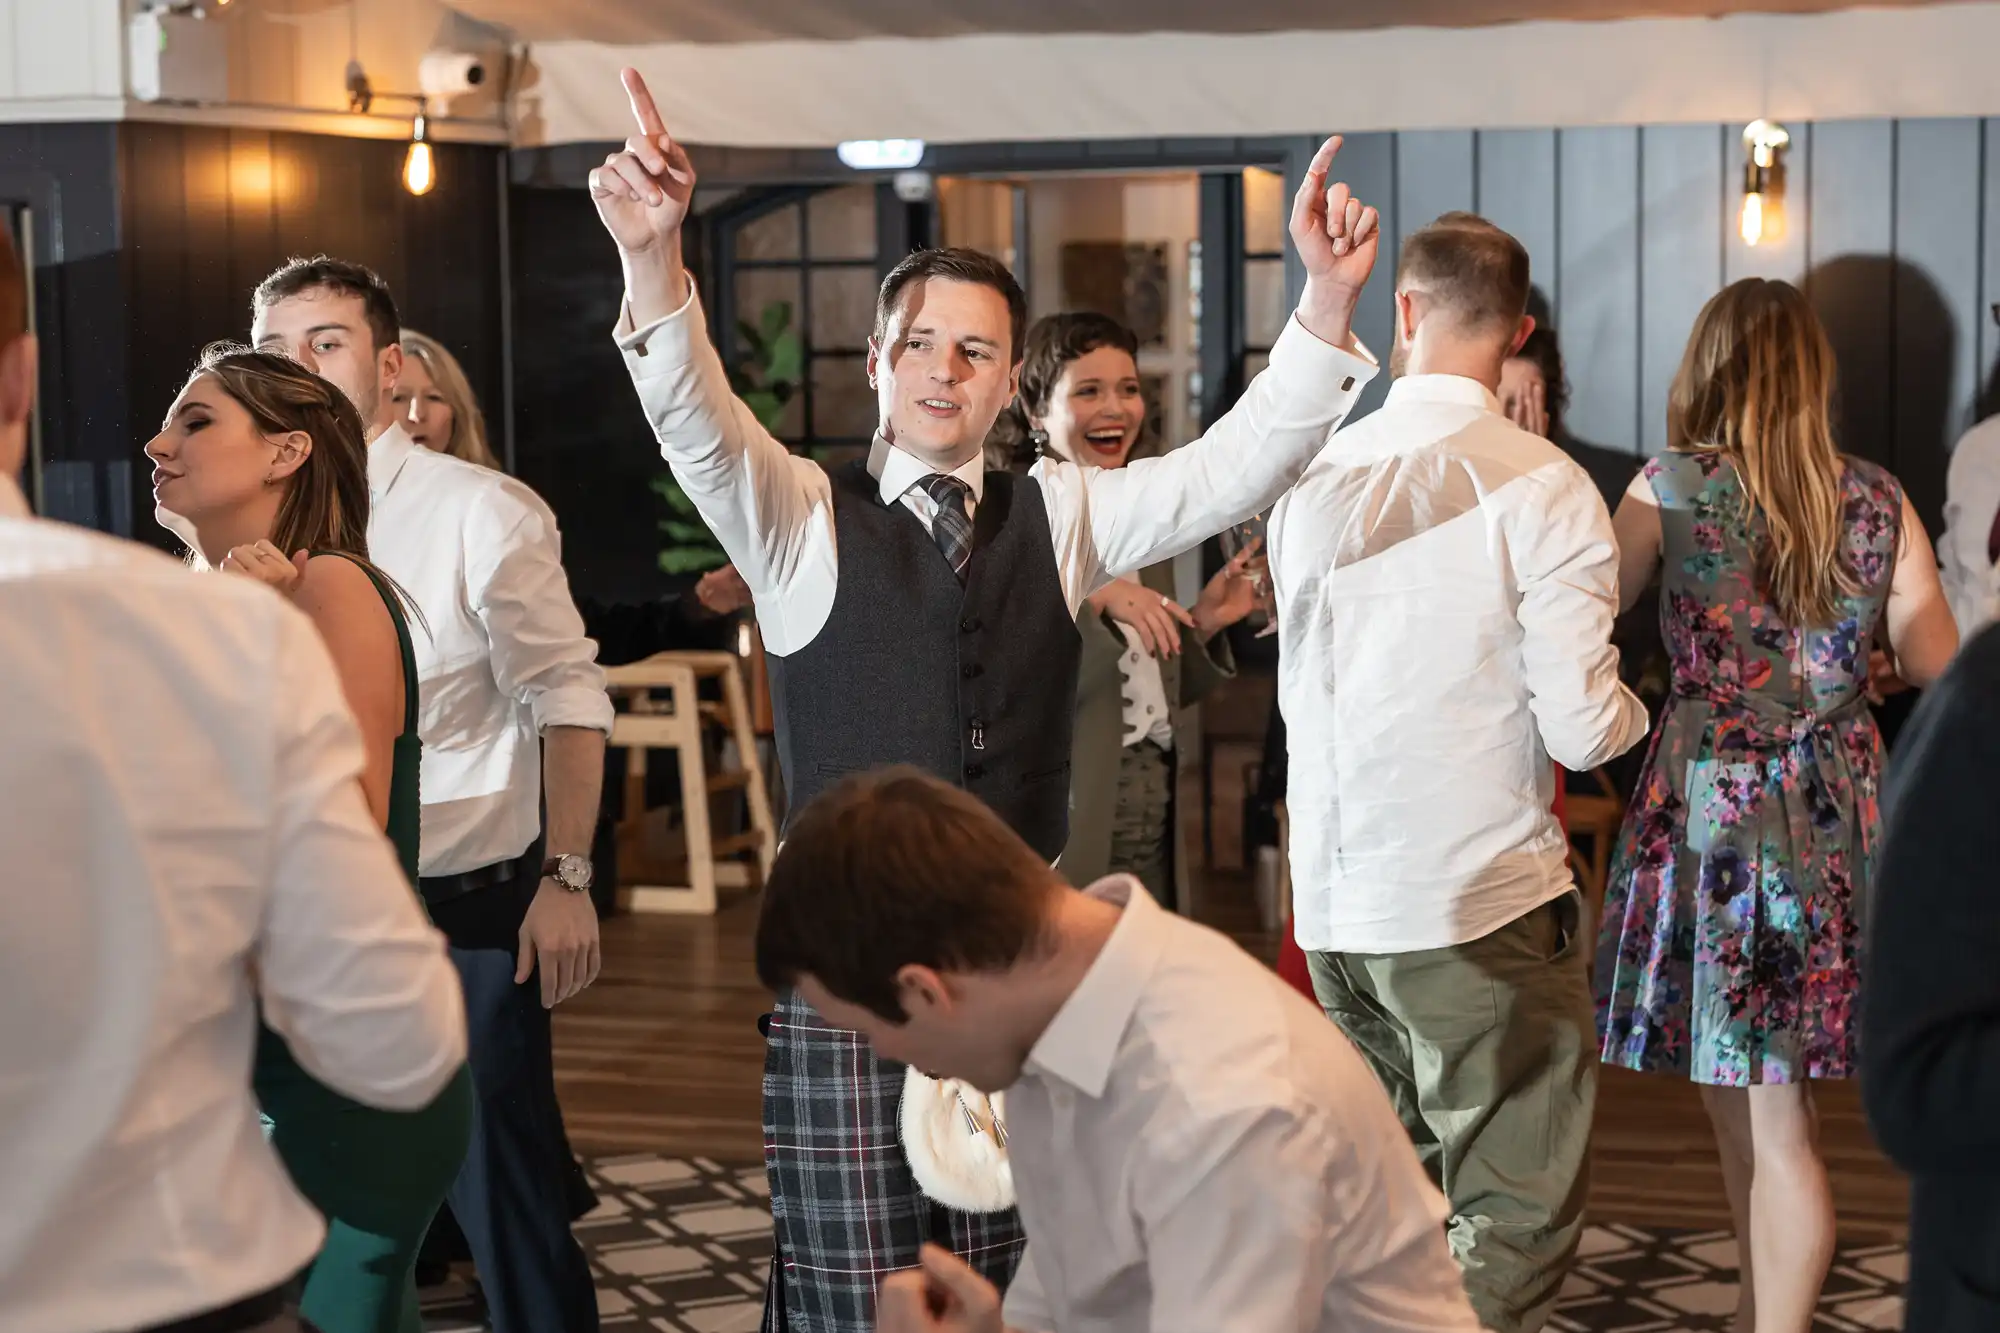 A group of people are dancing at a party. A man in the center wears a vest and plaid pants, raising both hands with fingers pointing up. Others around him are mingling and dancing.